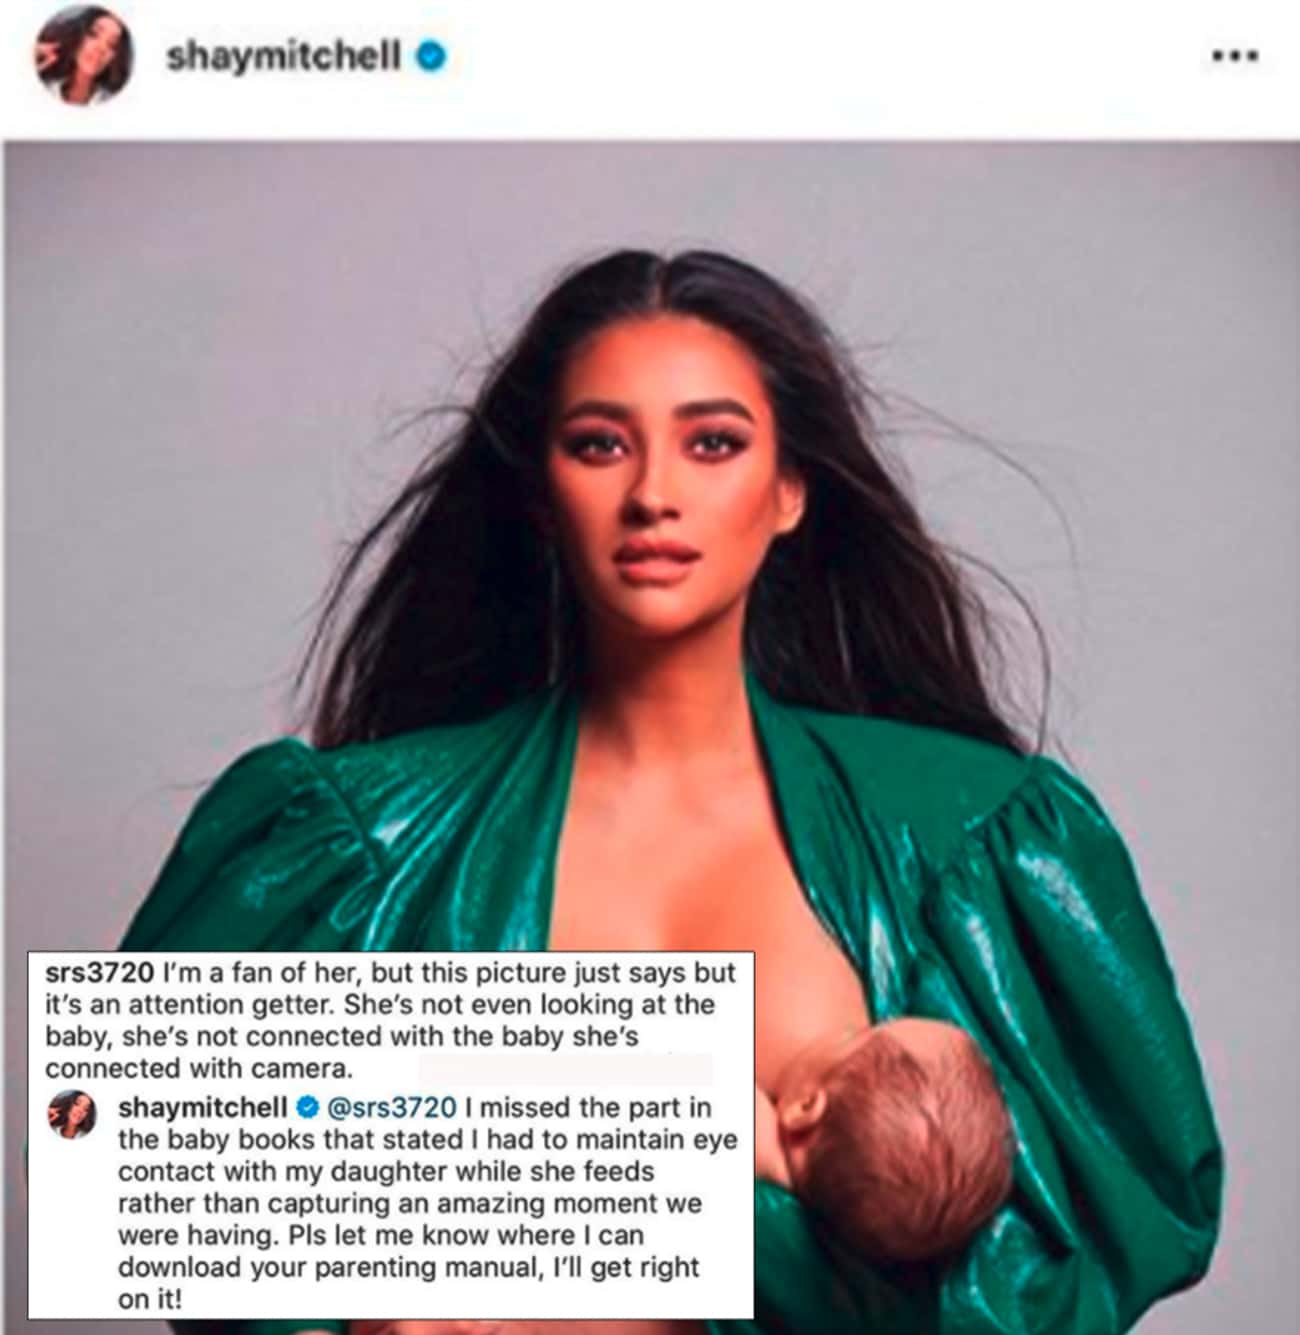 celebs savage replies - shay mitchell breastfeeding - shaymitchell srs3720 I'm a fan of her, but this picture just says but it's an attention getter. She's not even looking at the baby, she's not connected with the baby she's connected with camera. shaymi